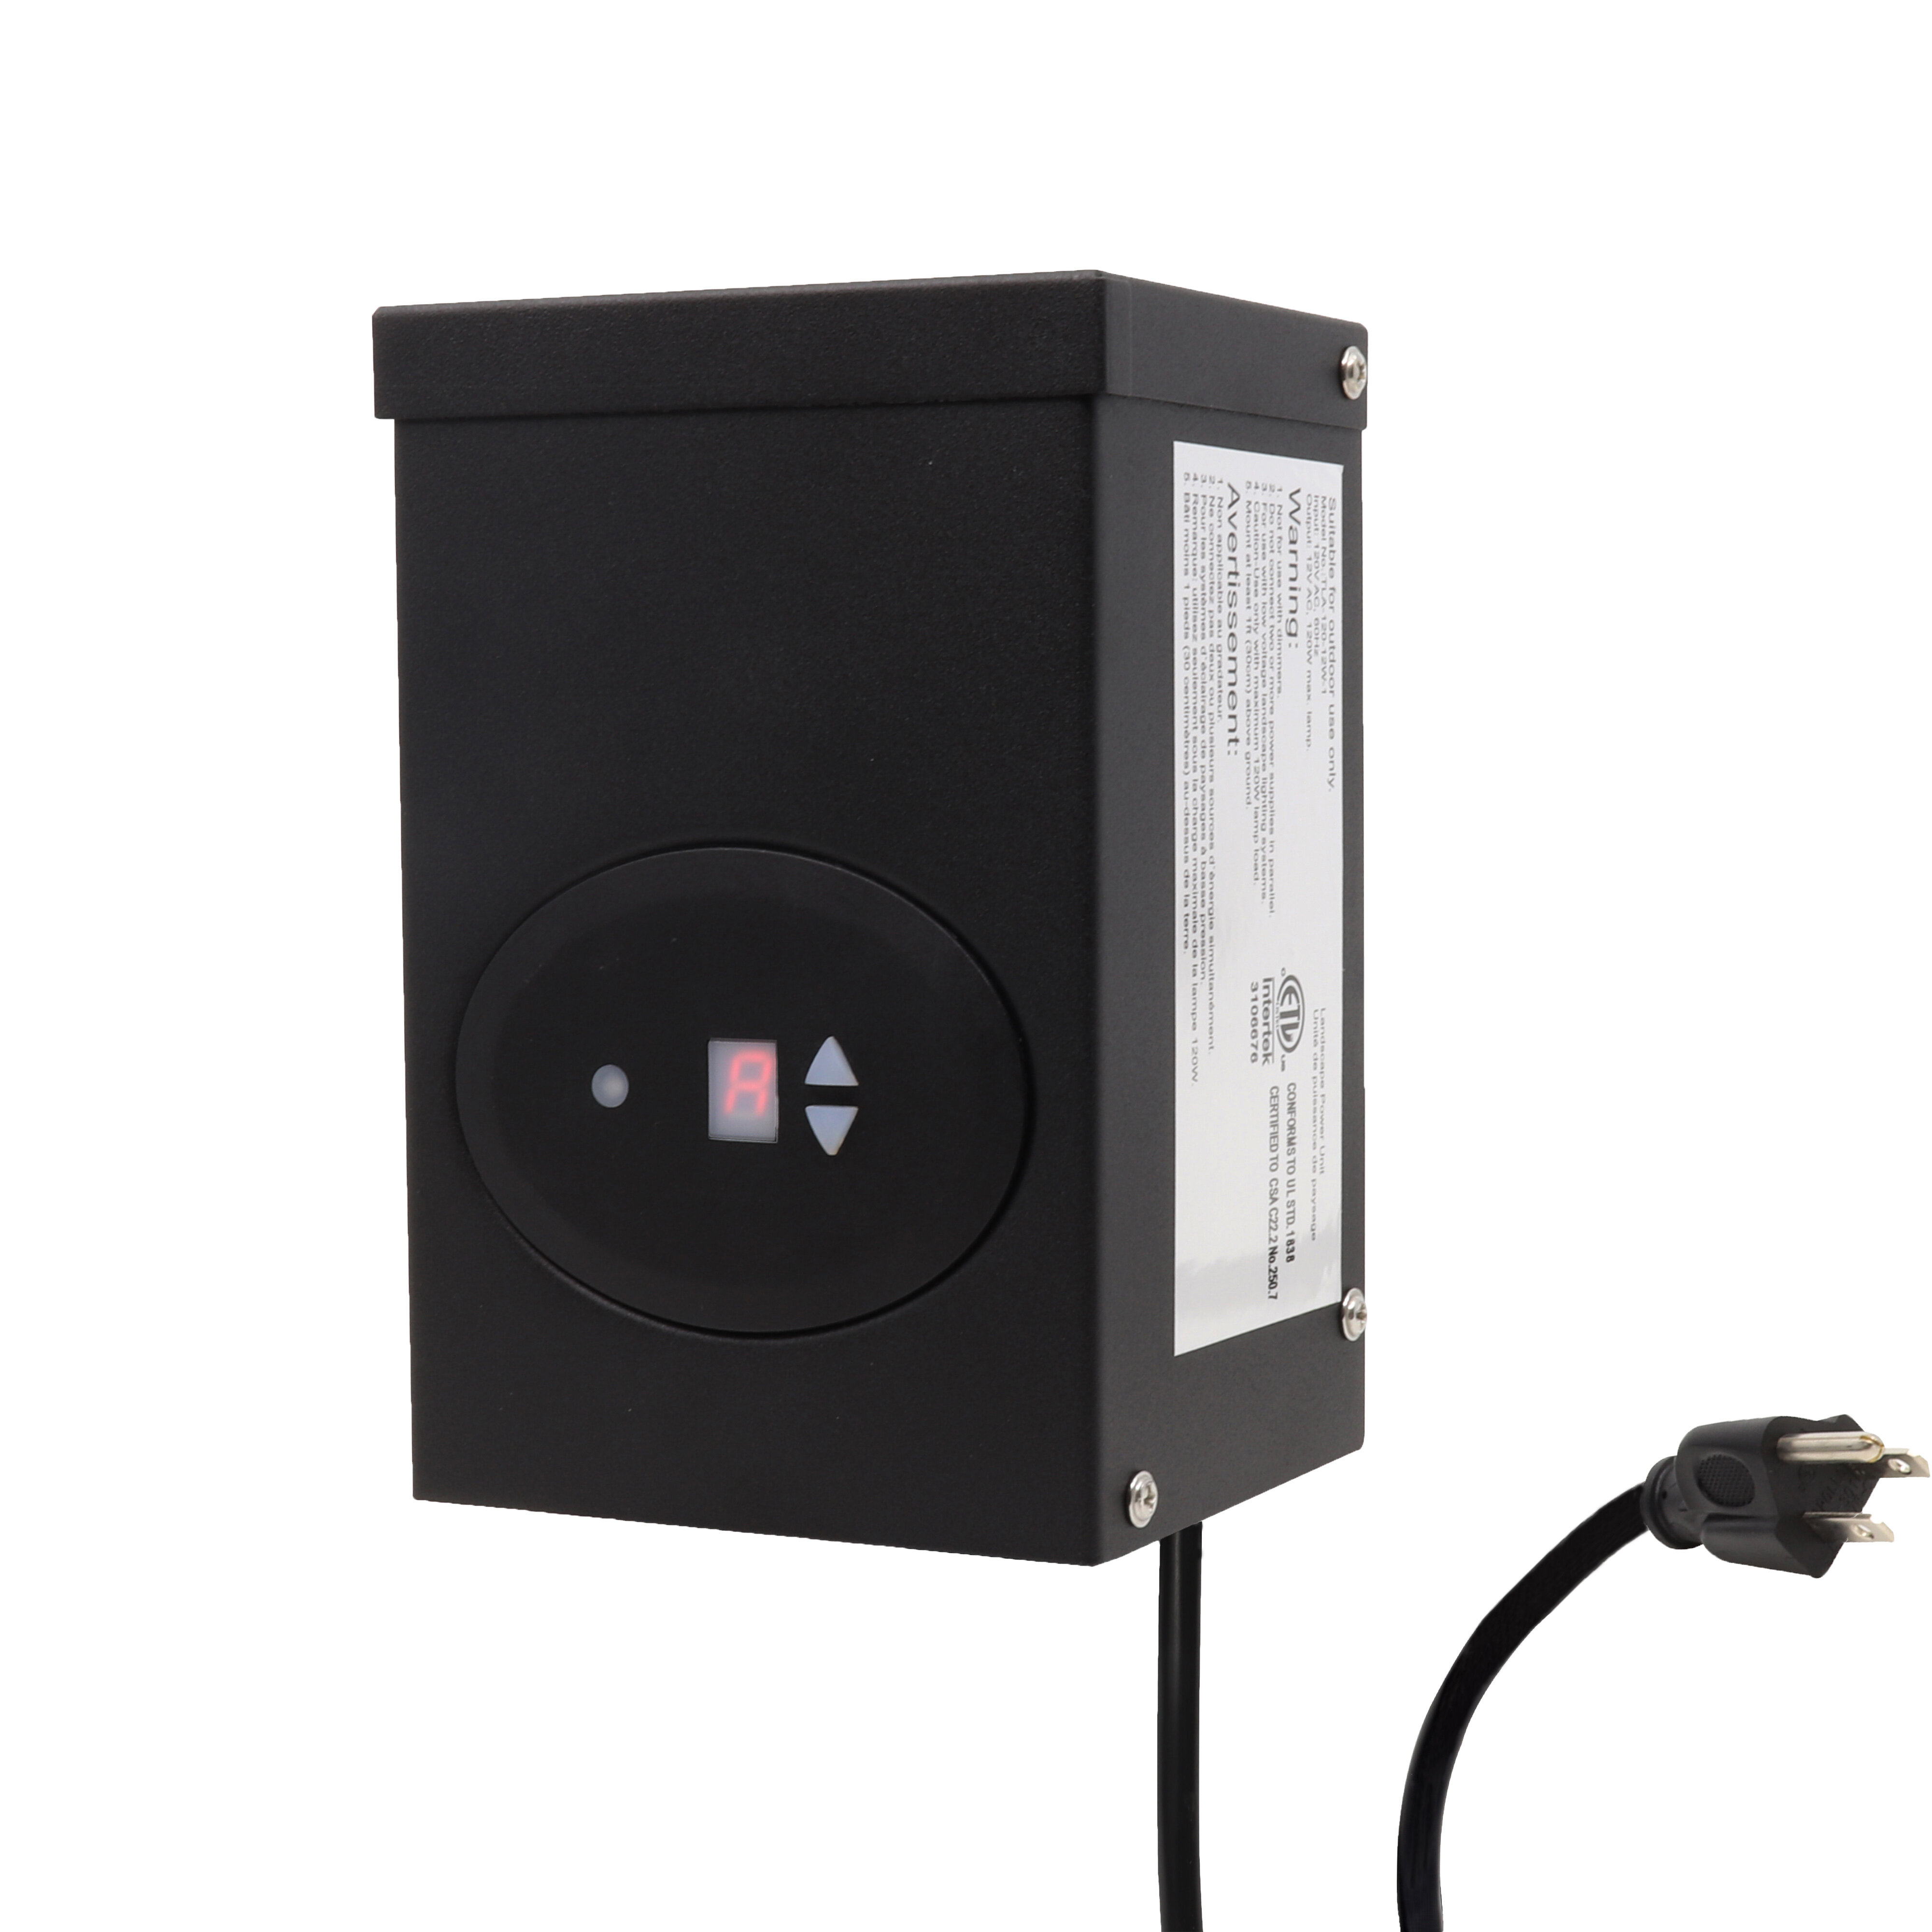 Etl Listed 120w Low Voltage Transformer With Photocell And Timer, 120v Ac  To 12v Ac Outdoor Power Pack, Cec Vi Certified